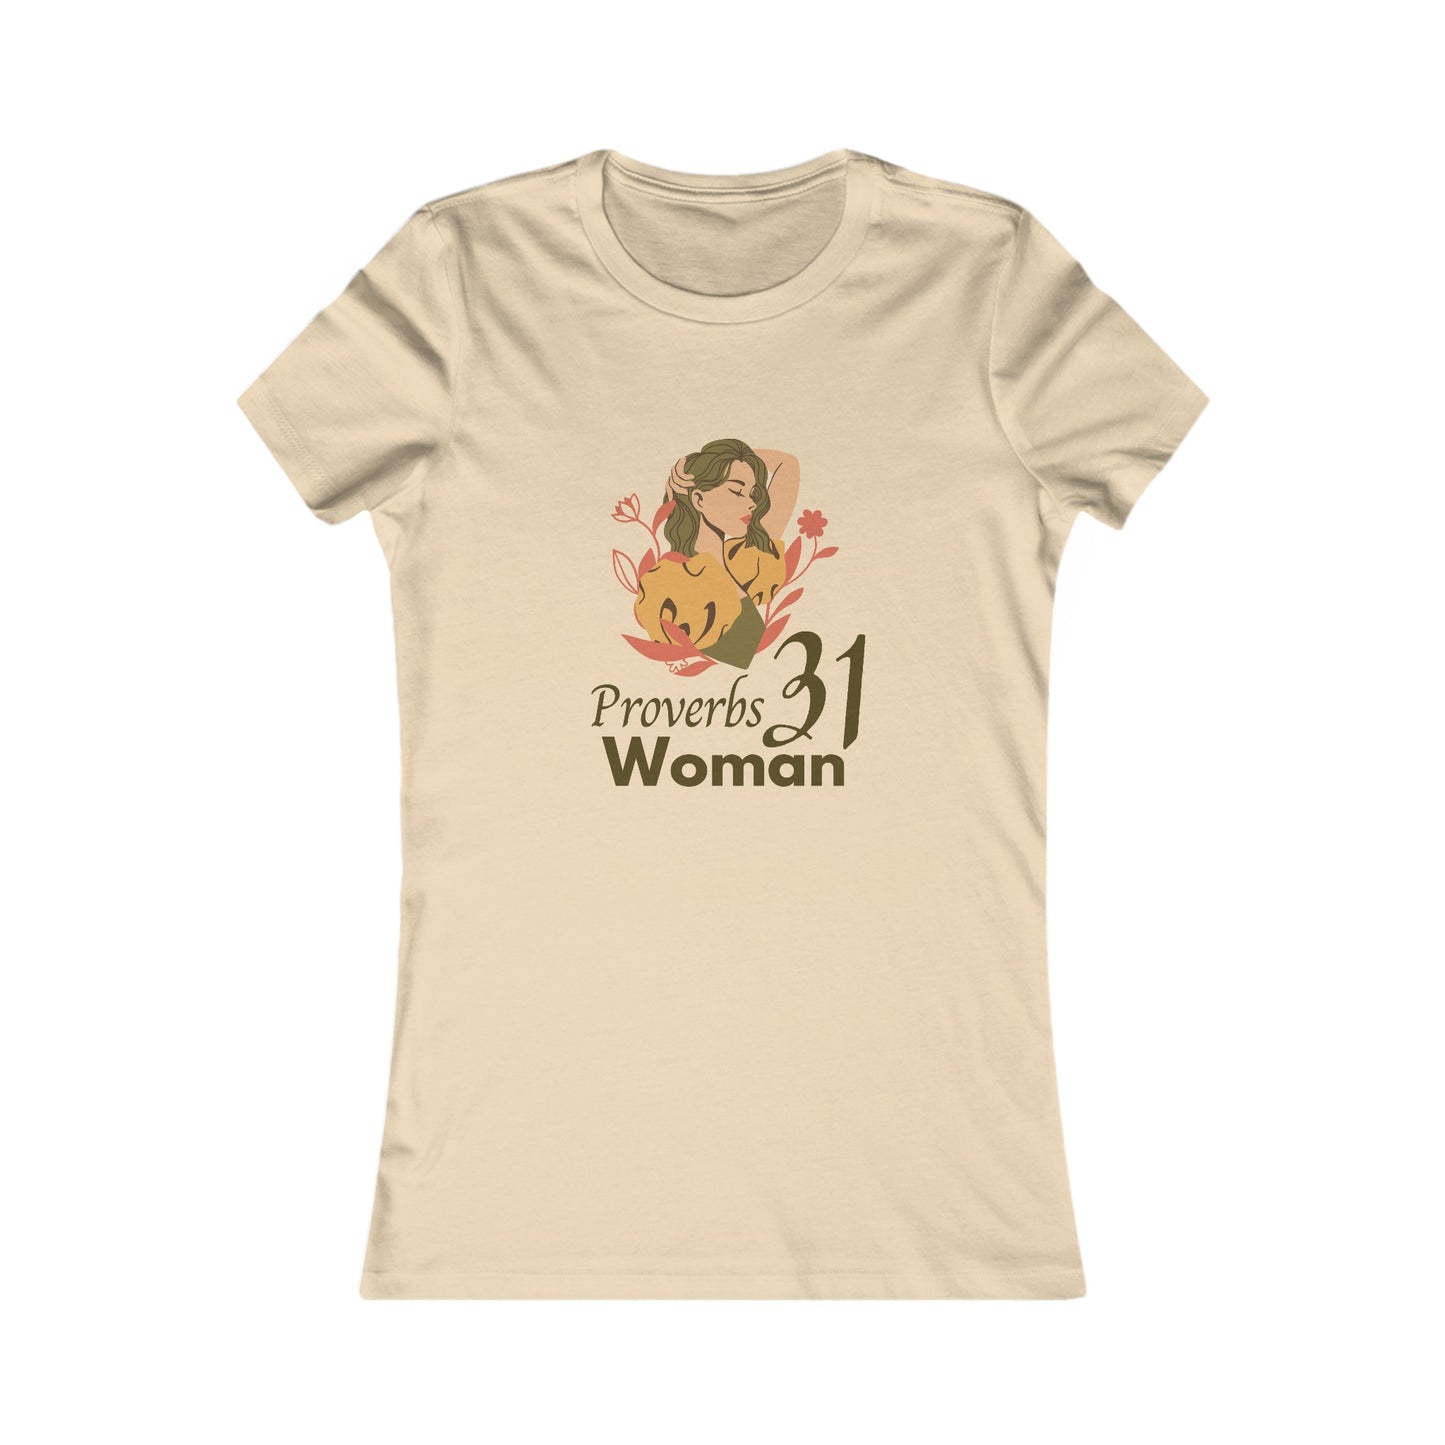 Proverbs 31 Portrait Women's Fitted Tshirt (Fall Colors Logo)